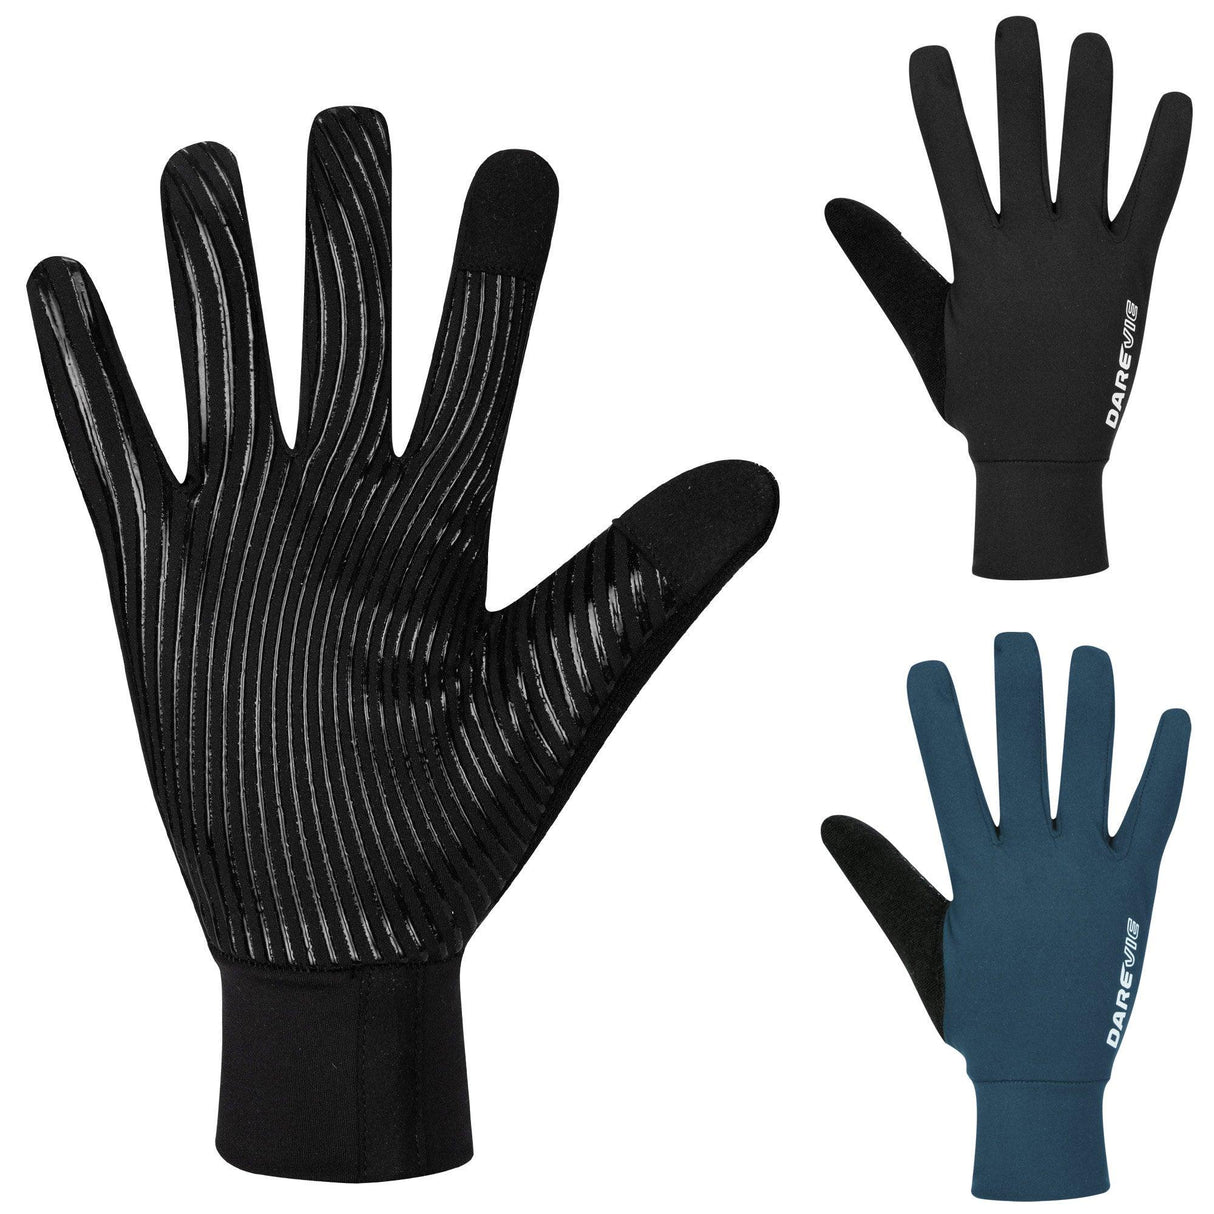 RIDEVENTURE THERMAL FULL FINGER CYCLING GLOVES - Darevie Shop